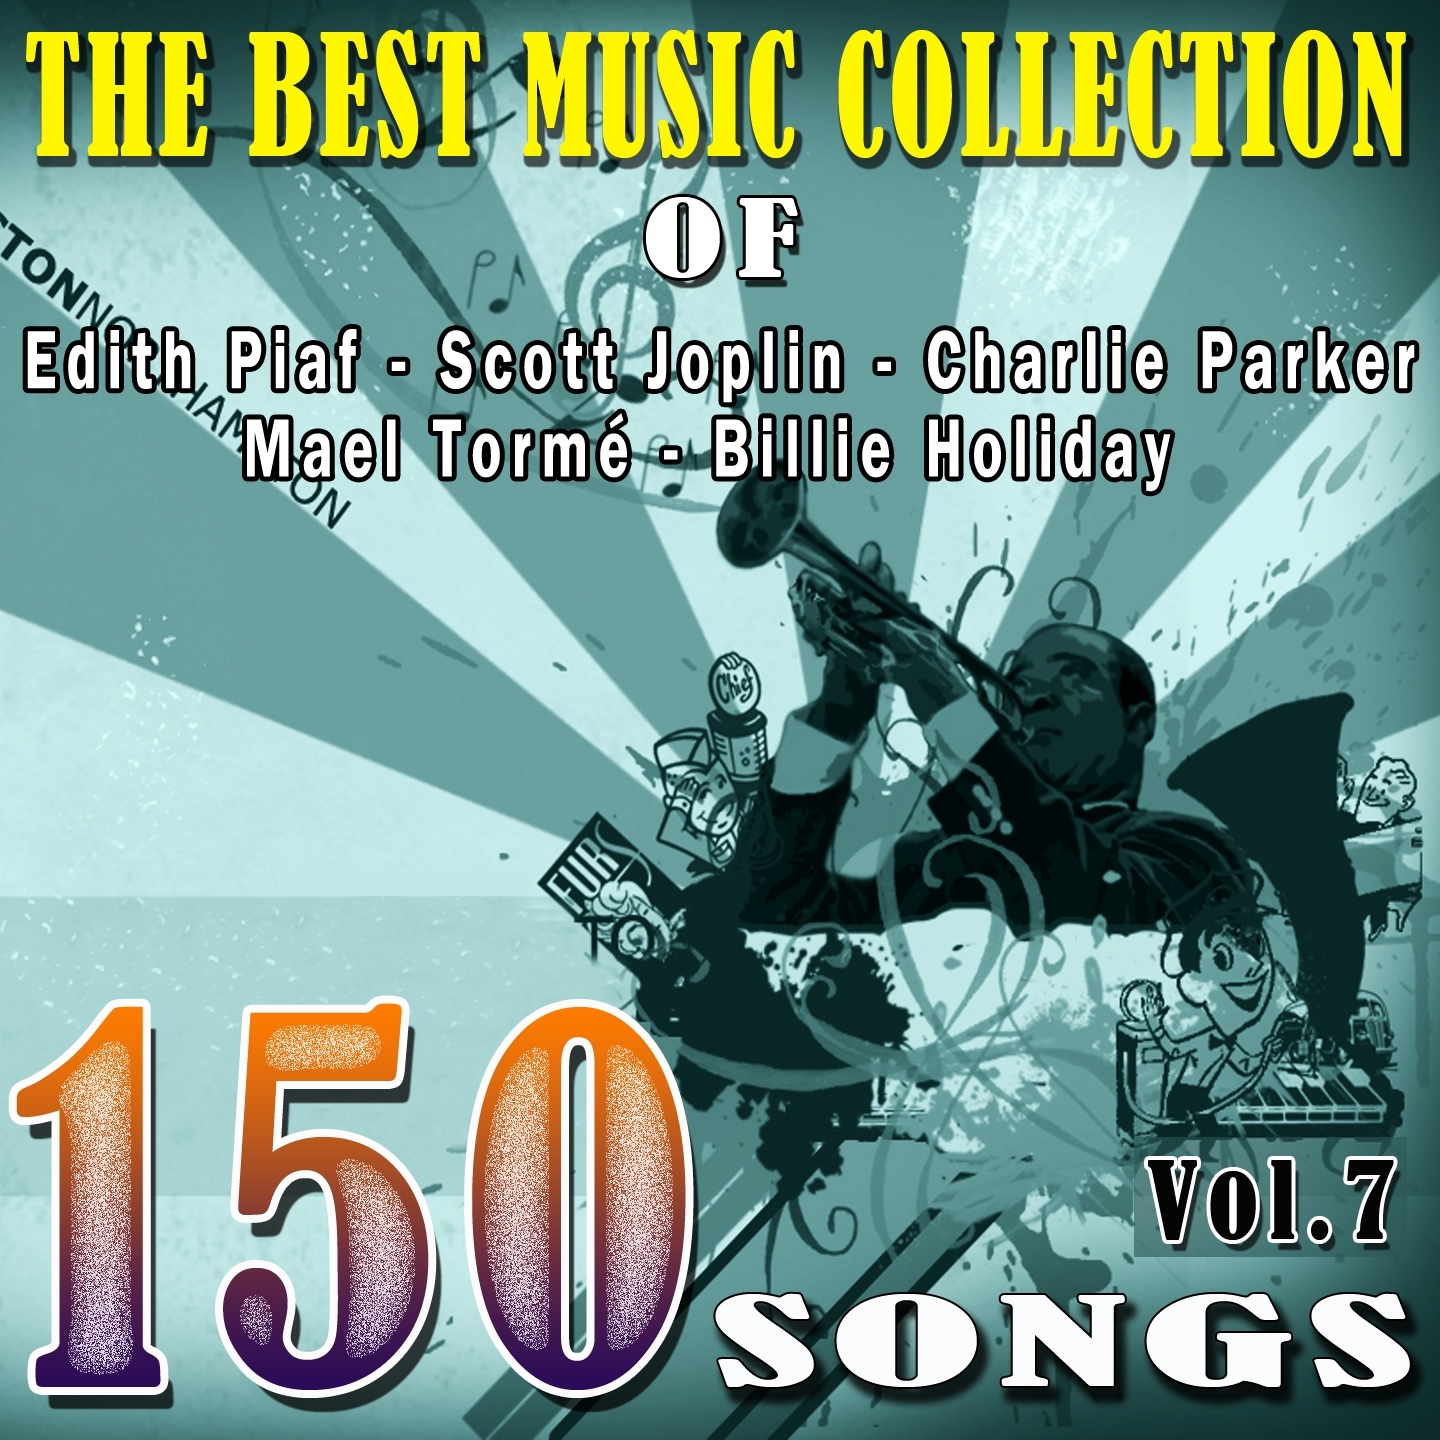 The Best Music Collection of Edith Piaf, Scott Joplin, Charlie Parker, Mael Torme, Billie Holiday and Other Famous Artists, Vol. 7 150 Songs